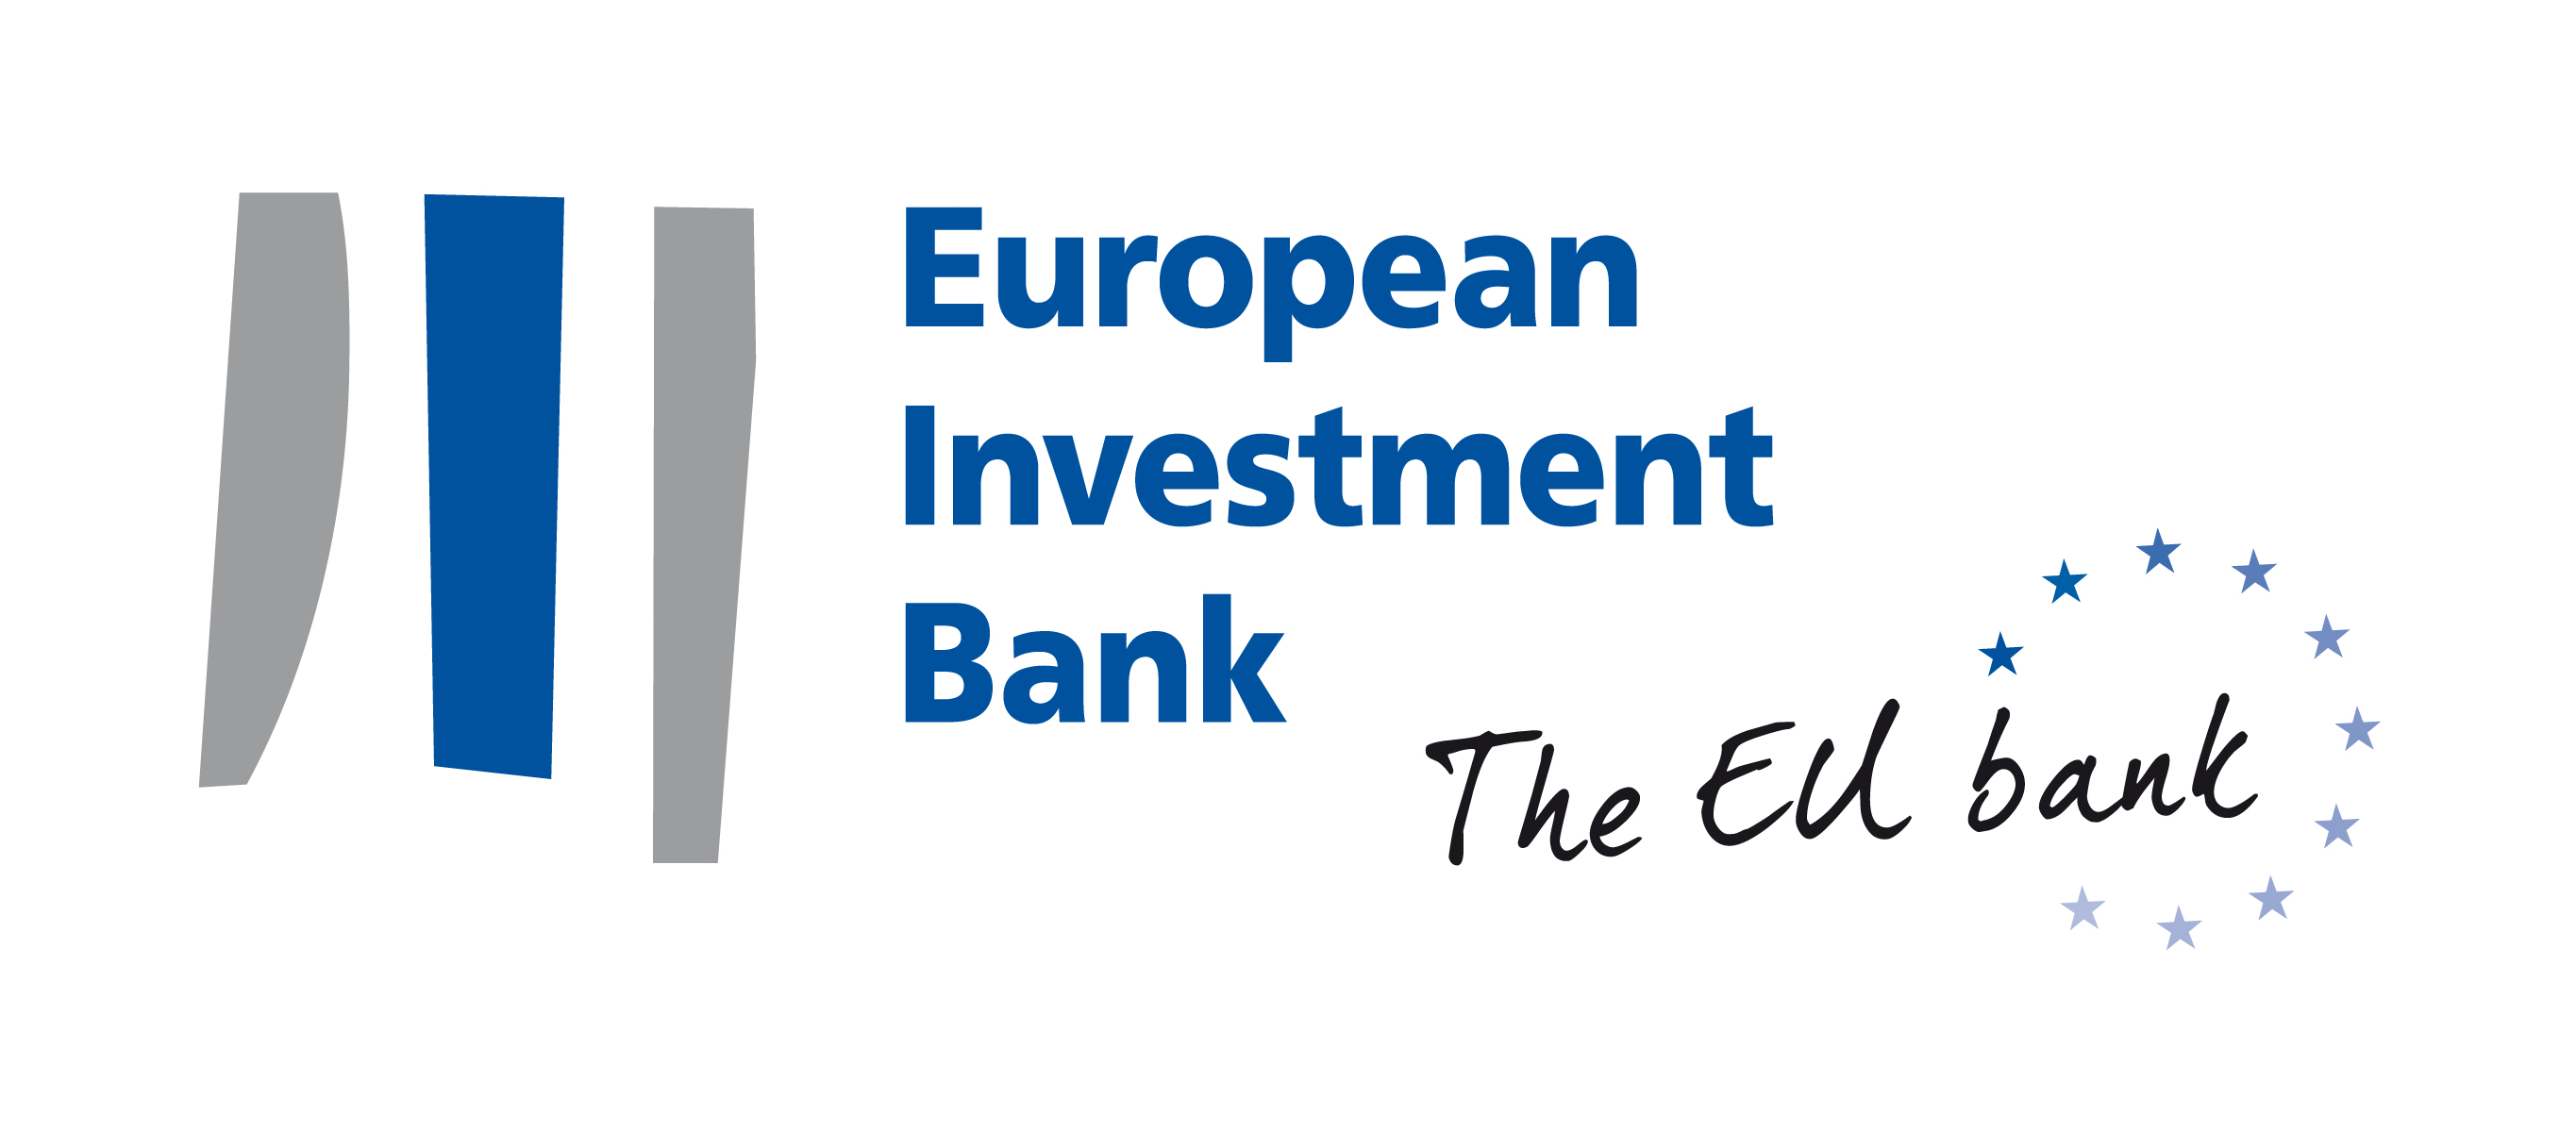 European Investment Bank (EIB) President Hoyer backs climate adaptation projects across Africa